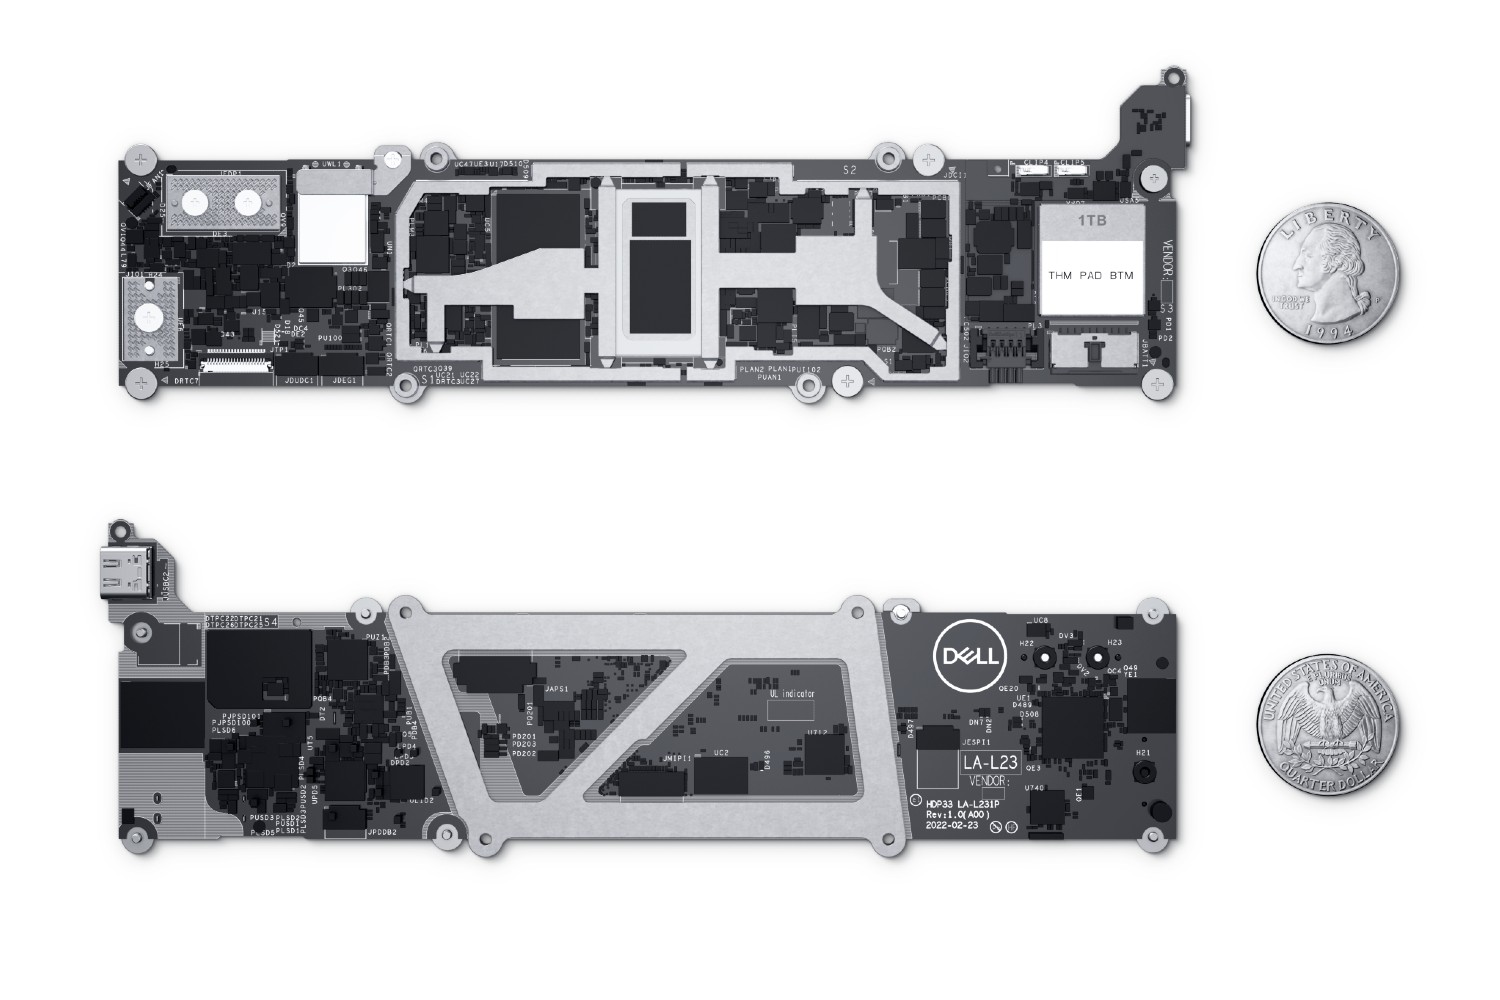 The old and new motherboards of the XPS 13.